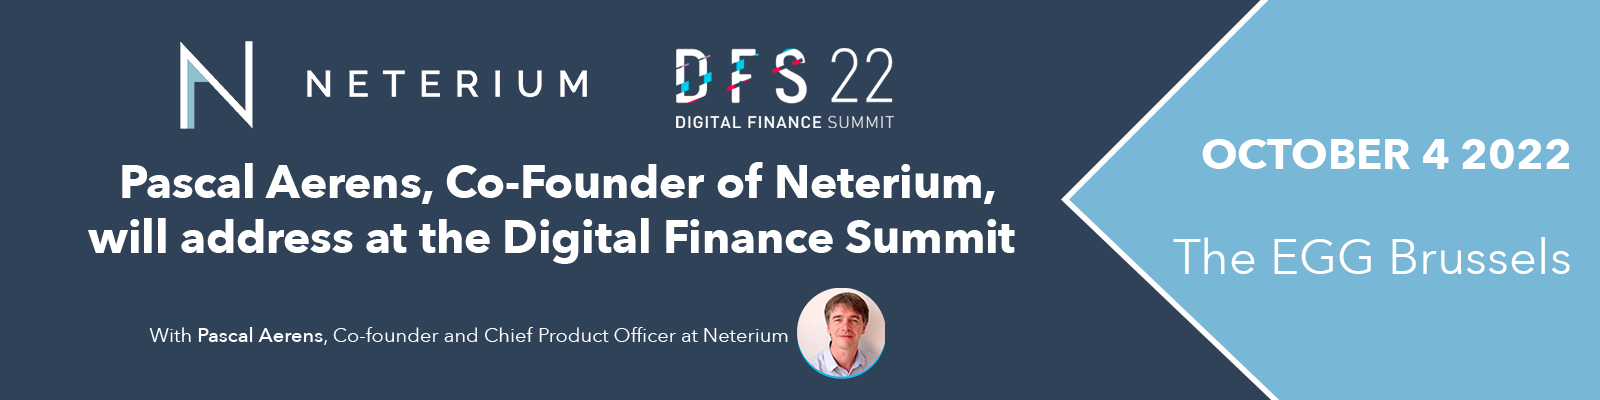 Pascal Aerens, Co-Founder of Neterium at the Digital Finance Summit 2022